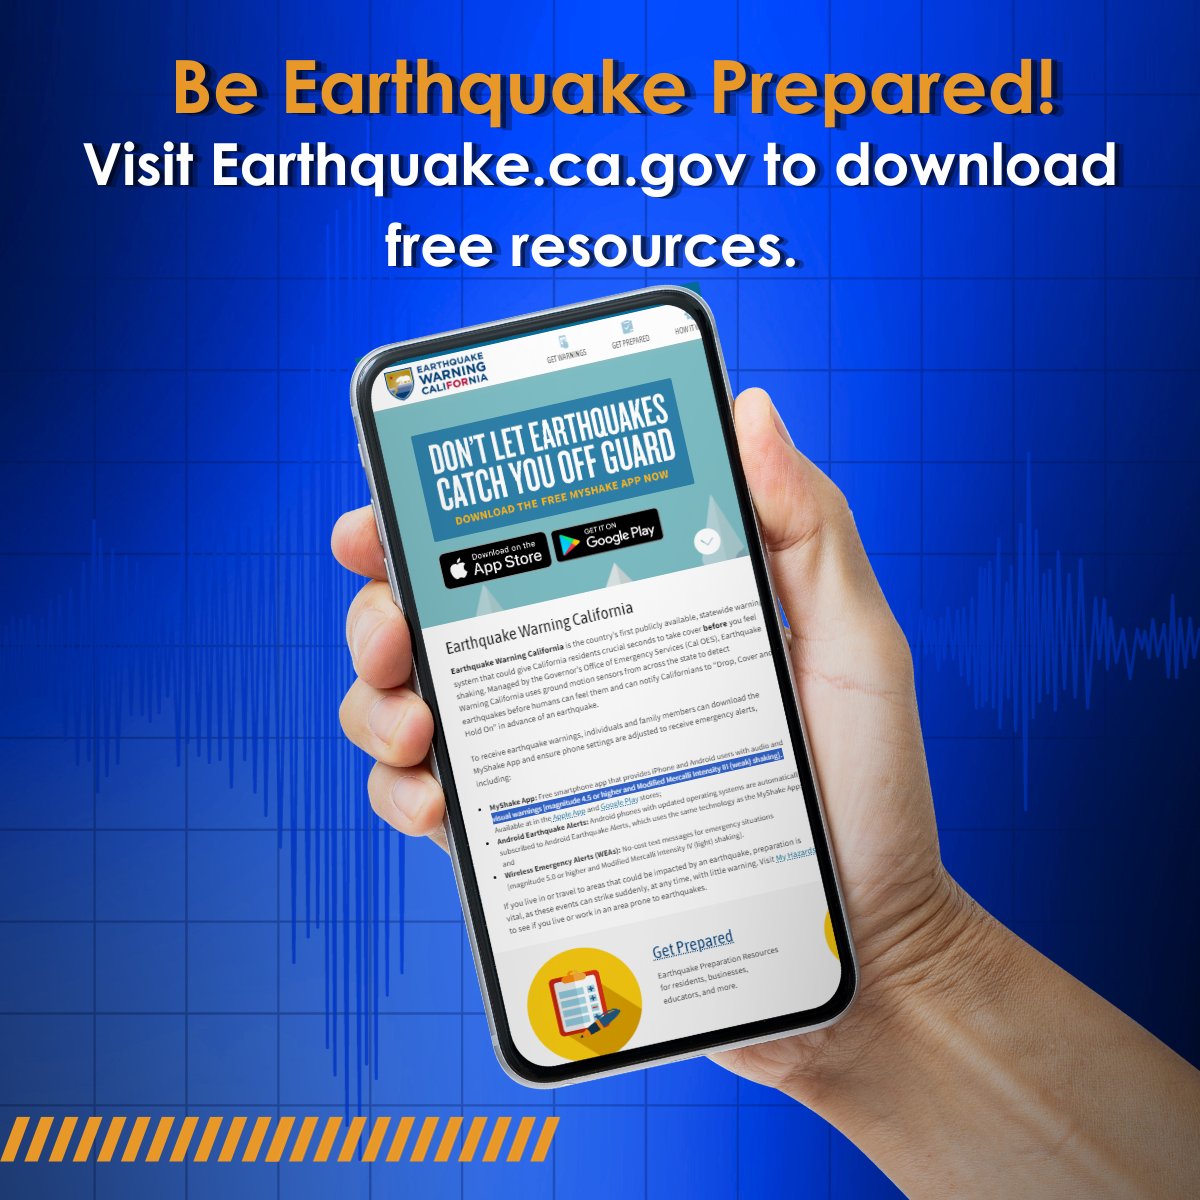 #EarthquakeWarningCA California is educating Californians on how they can be prepared in the case of an earthquake. Visit earthquake.ca.gov to access: Crucial tips and resources.